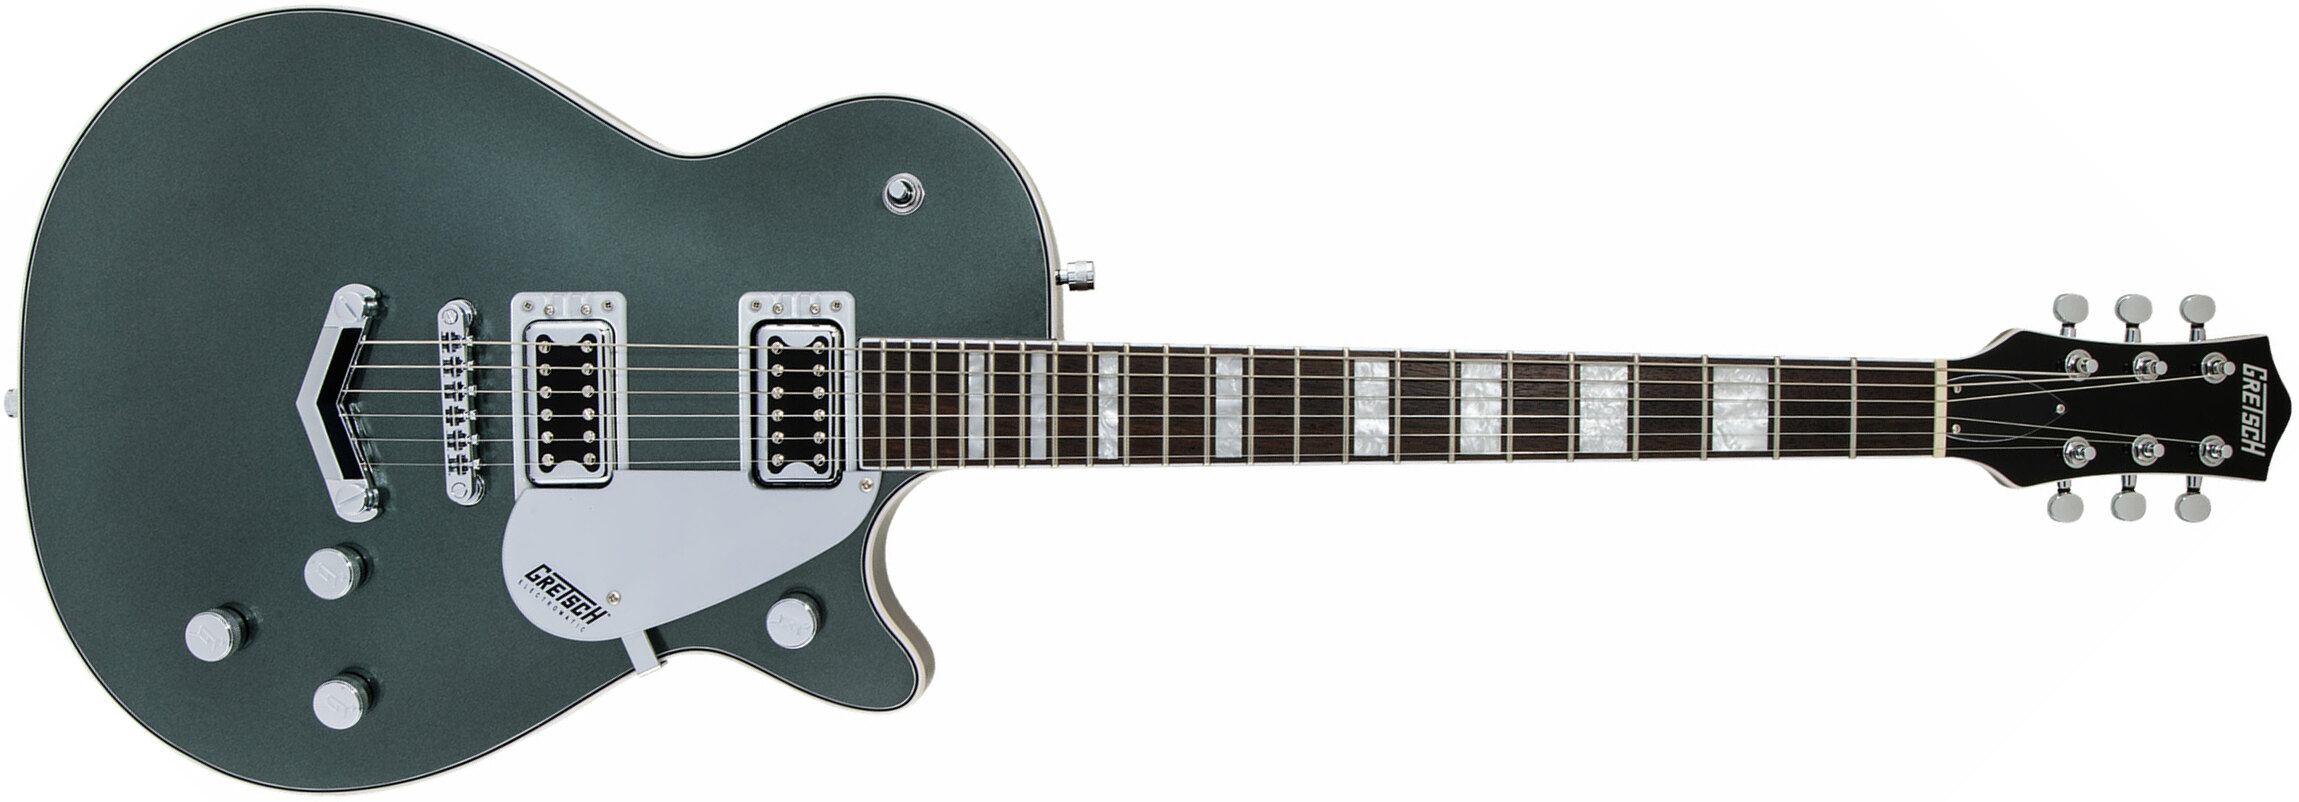 Gretsch G5220 Electromatic Jet Bt V-stoptail Hh Ht Wal - Jade Grey Metallic - Single cut electric guitar - Main picture